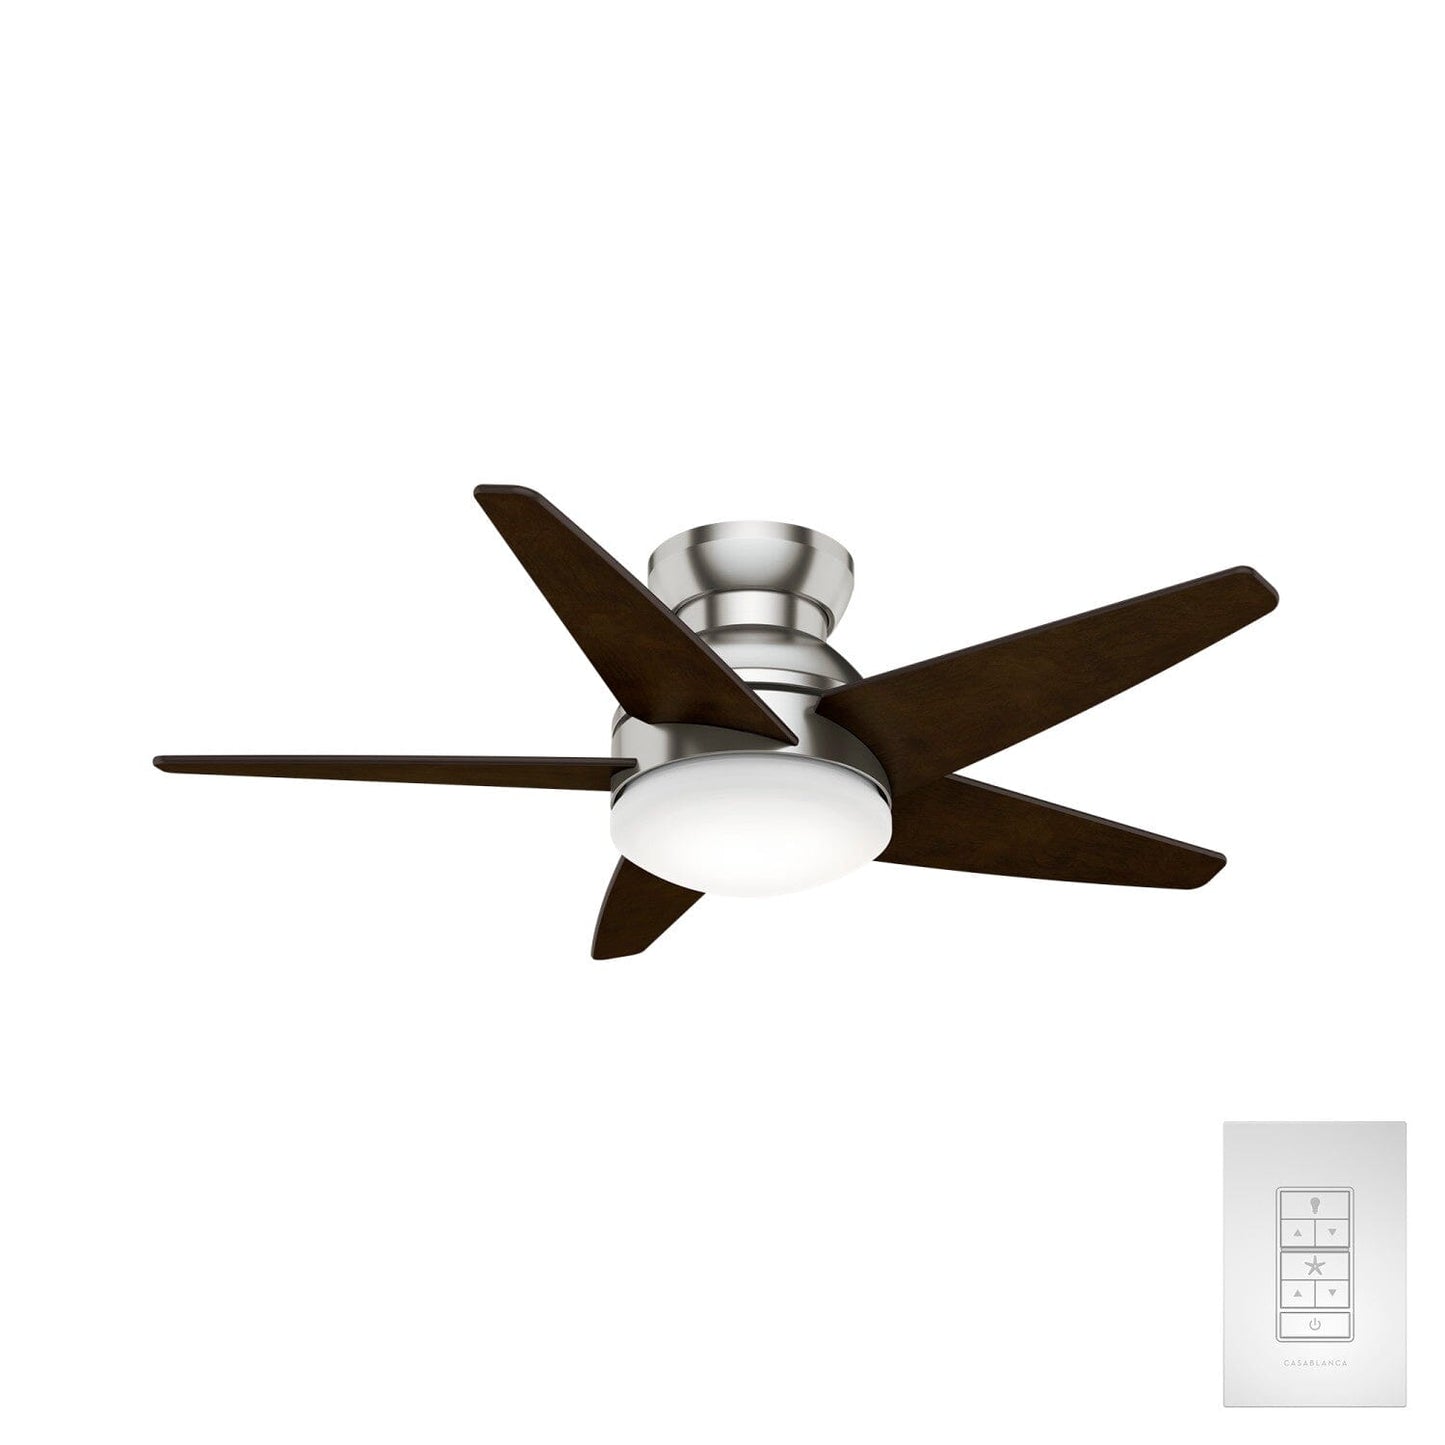 Isotope Low Profile with LED Light 44 inch Ceiling Fans Casablanca Brushed Nickel - Espresso 